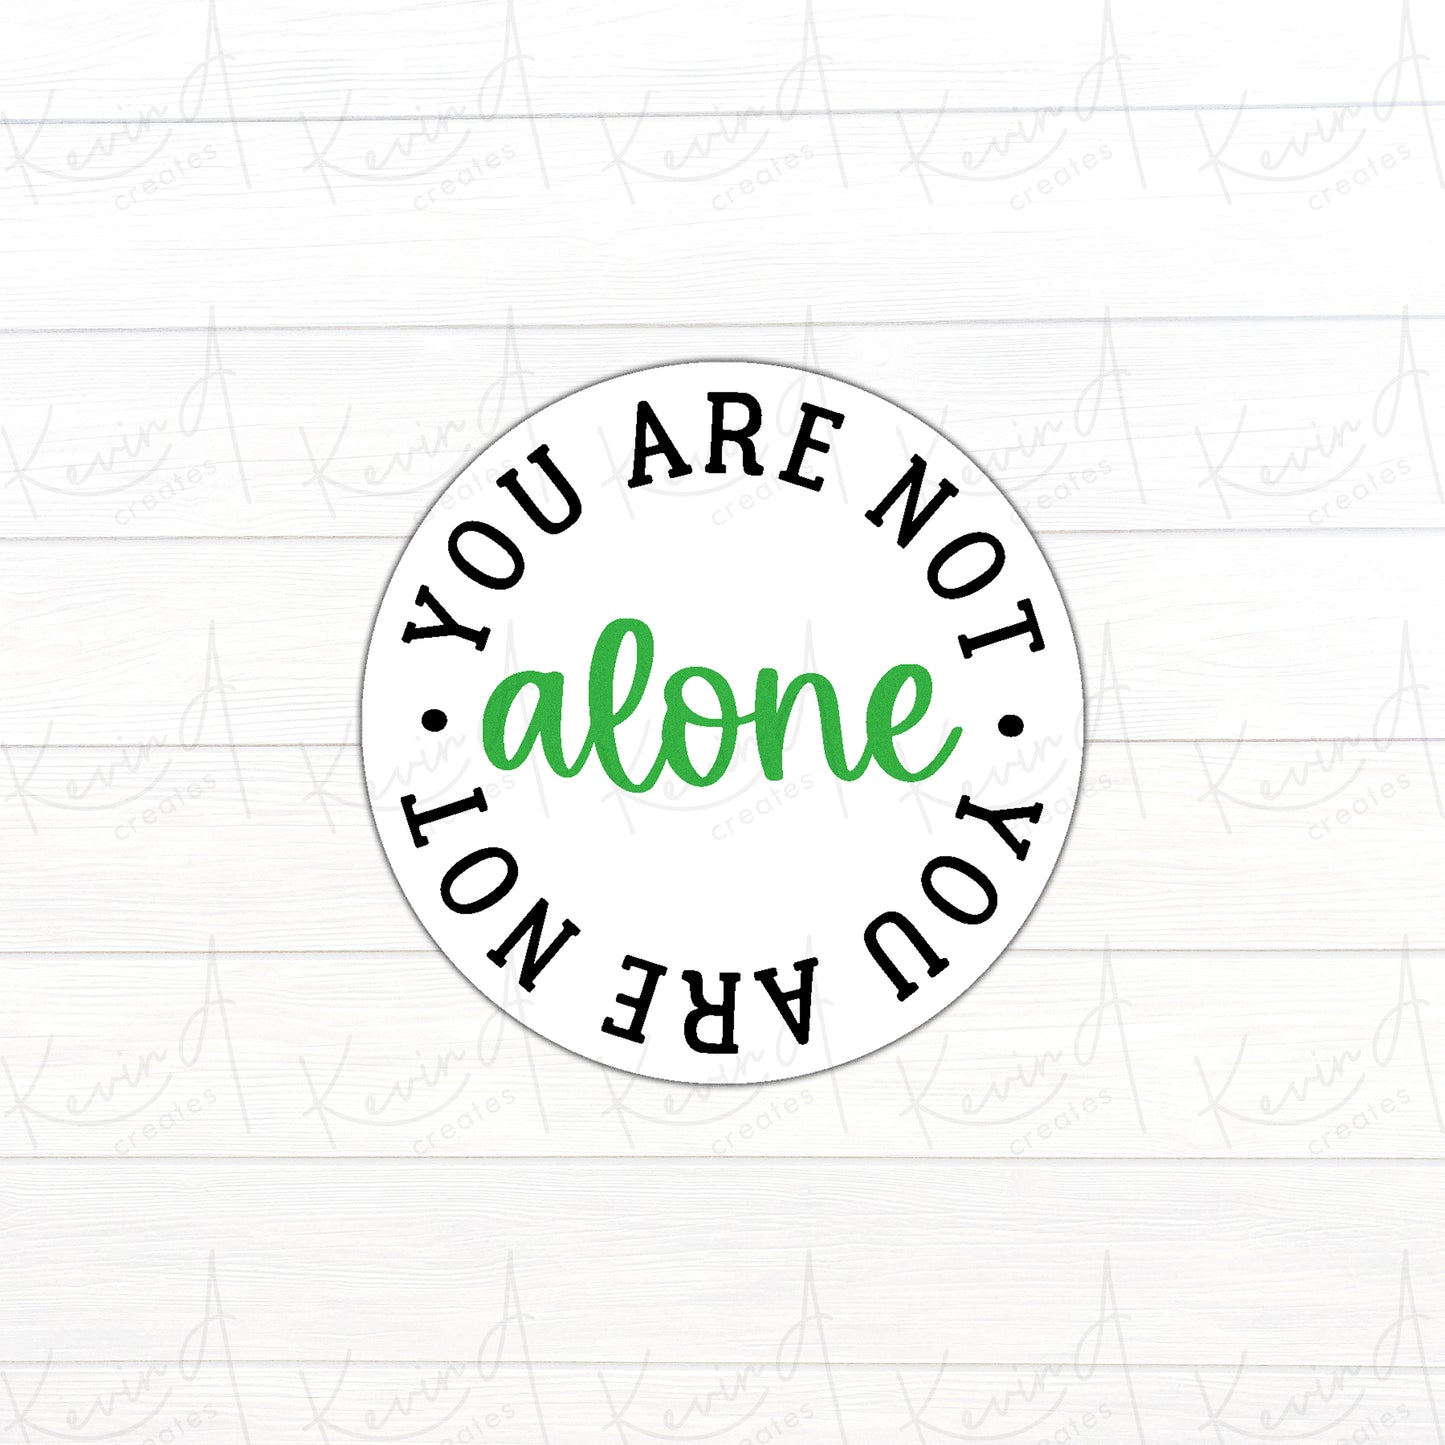 DC-046, "You Are Not Alone" Mental Health Die Cut Stickers